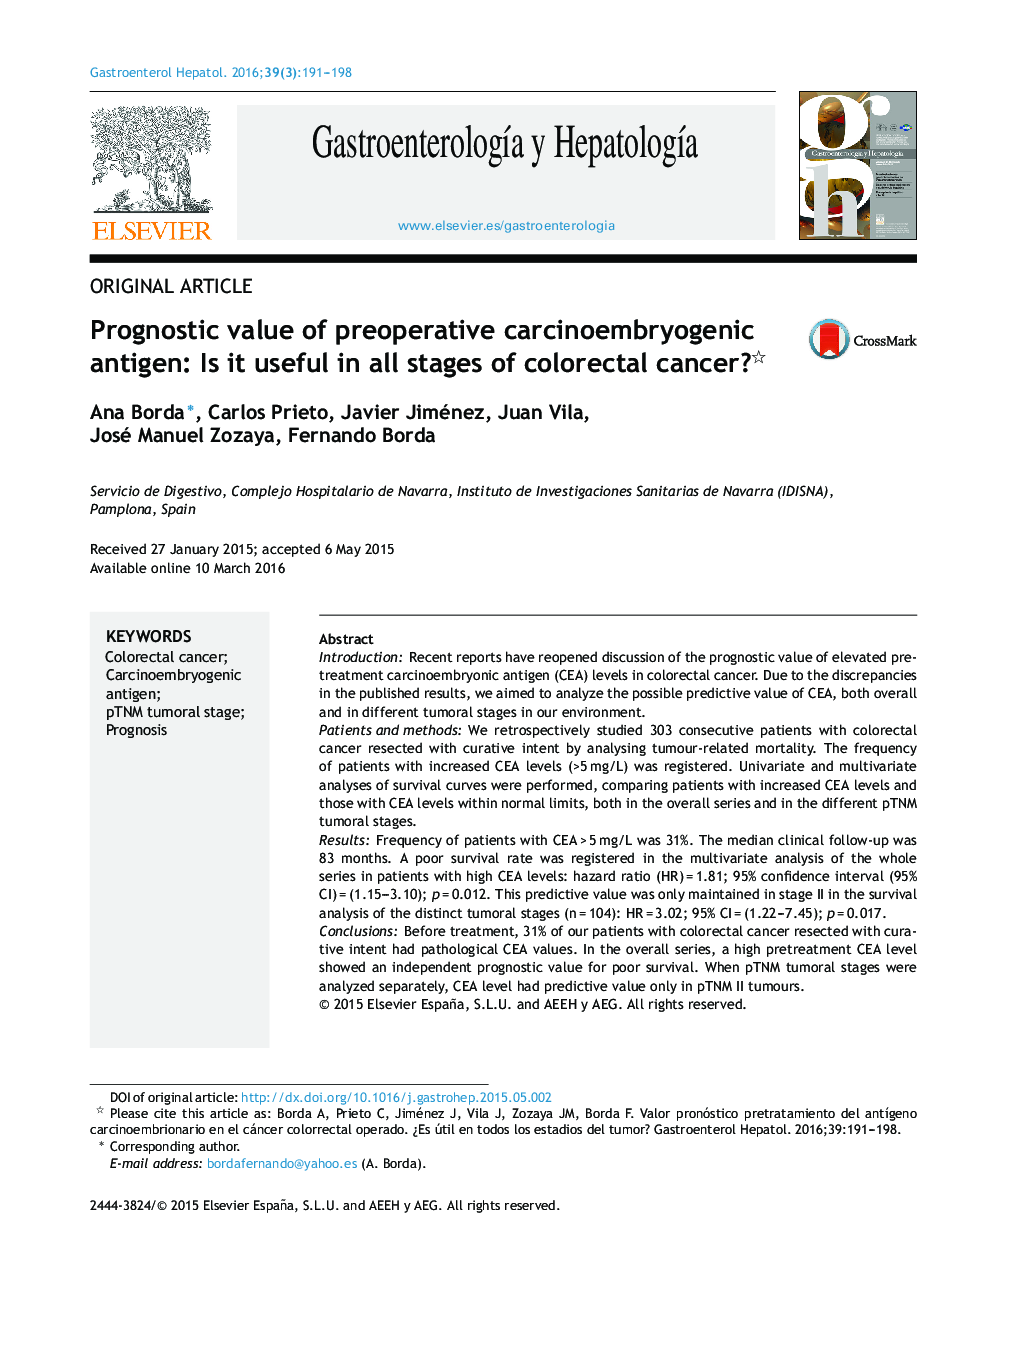 Prognostic value of preoperative carcinoembryogenic antigen: Is it useful in all stages of colorectal cancer?